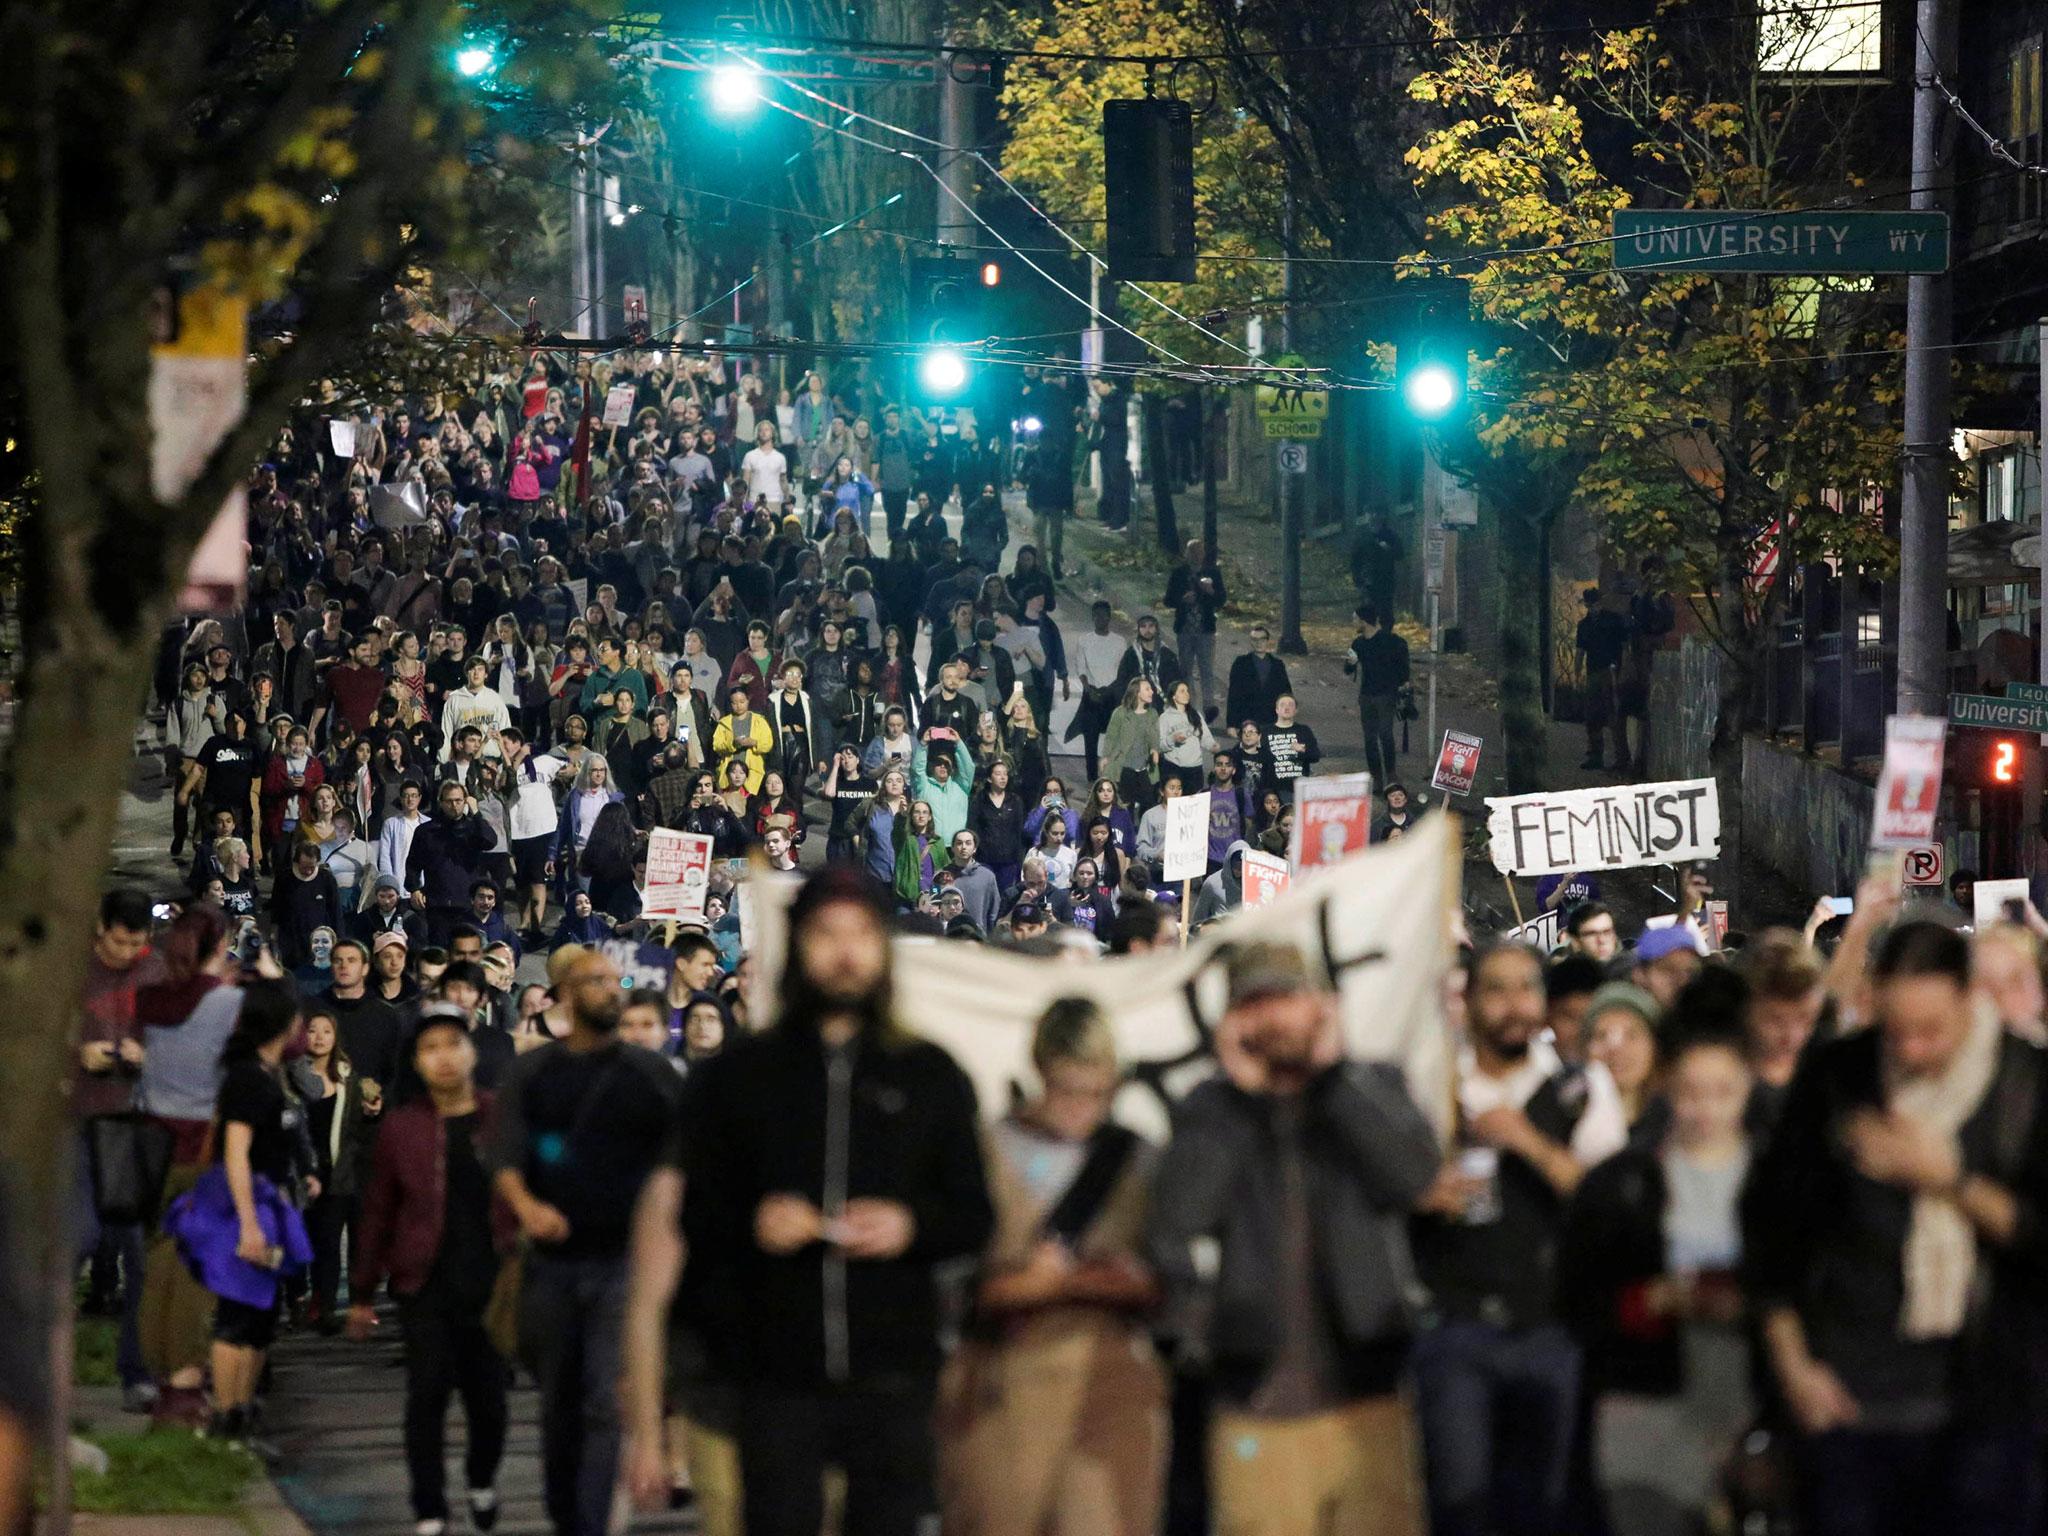 Protesters in Seattle, Washington